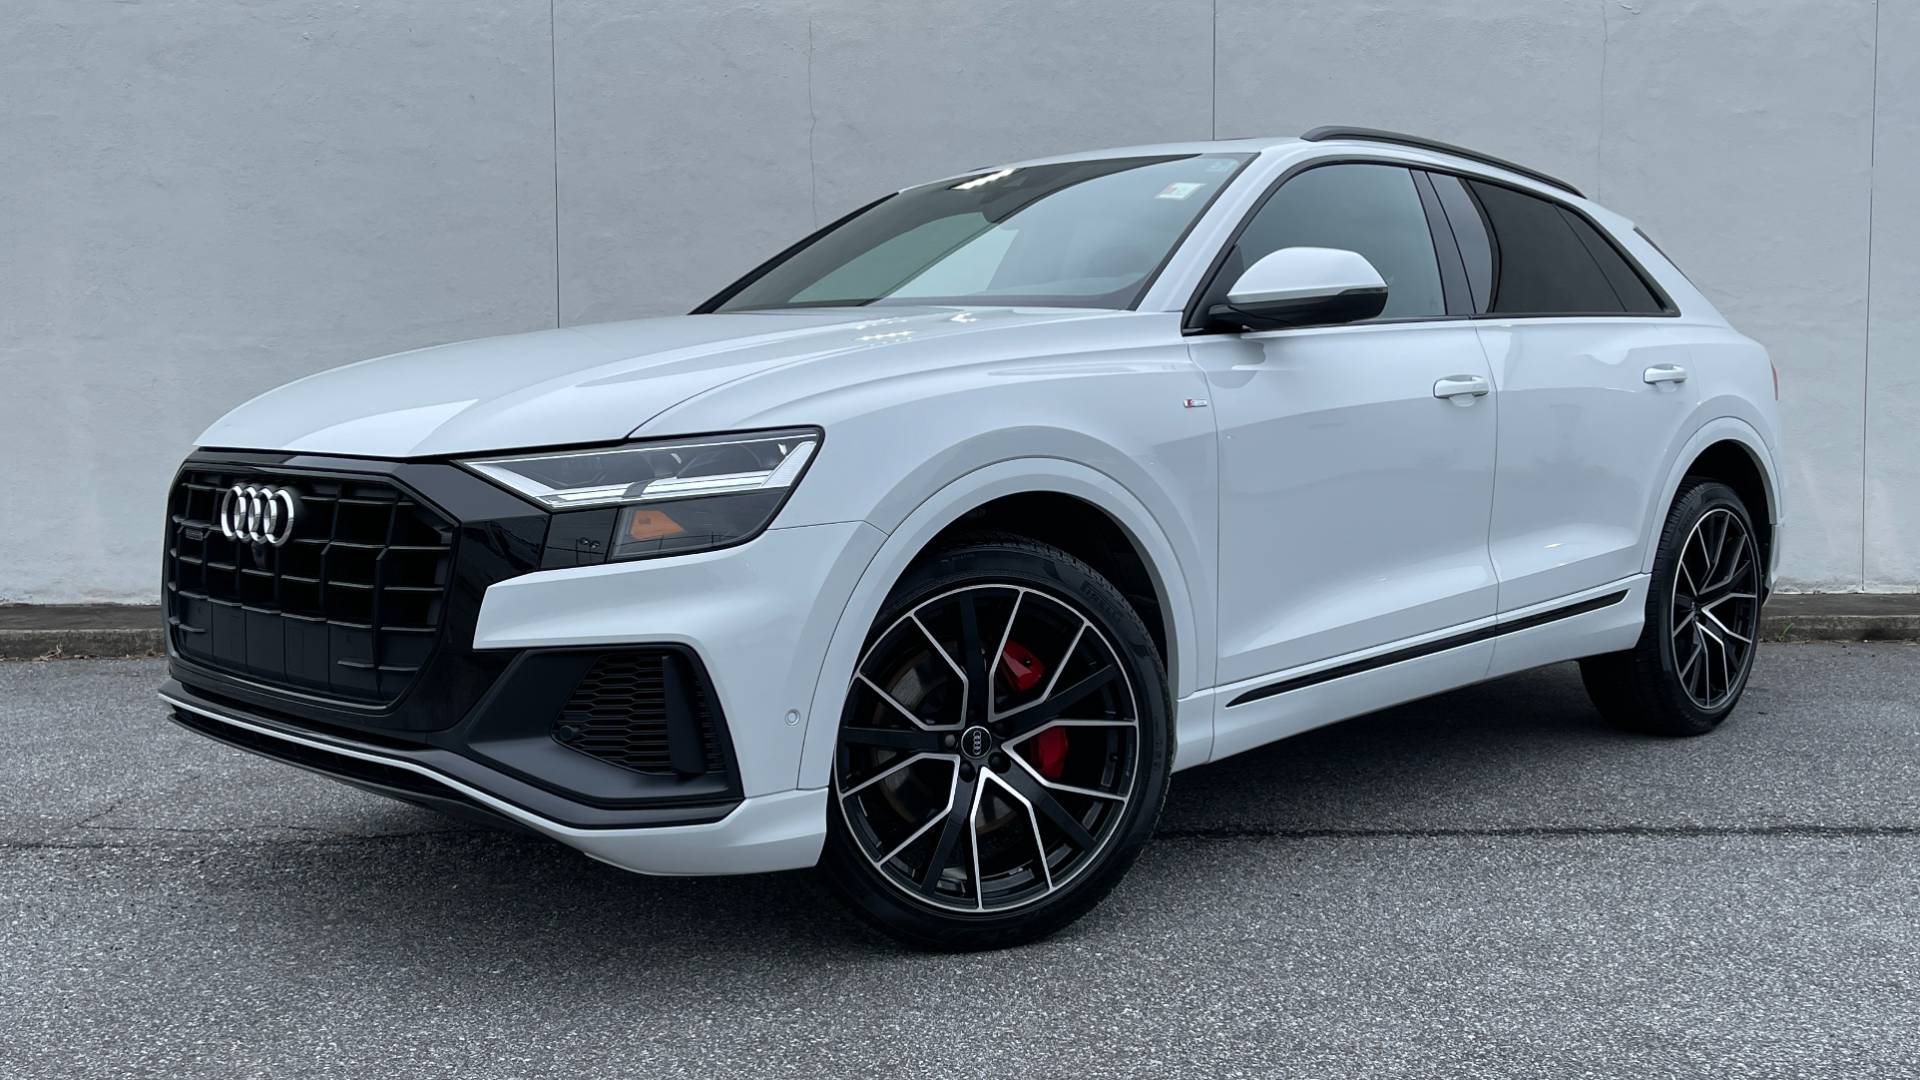 Used 2020 Audi Q8 PREMIUM PLUS / NAV / S-LINE / TOWING / BLACK OPTIC / B&O SND / REARVIEW for sale $63,995 at Formula Imports in Charlotte NC 28227 9